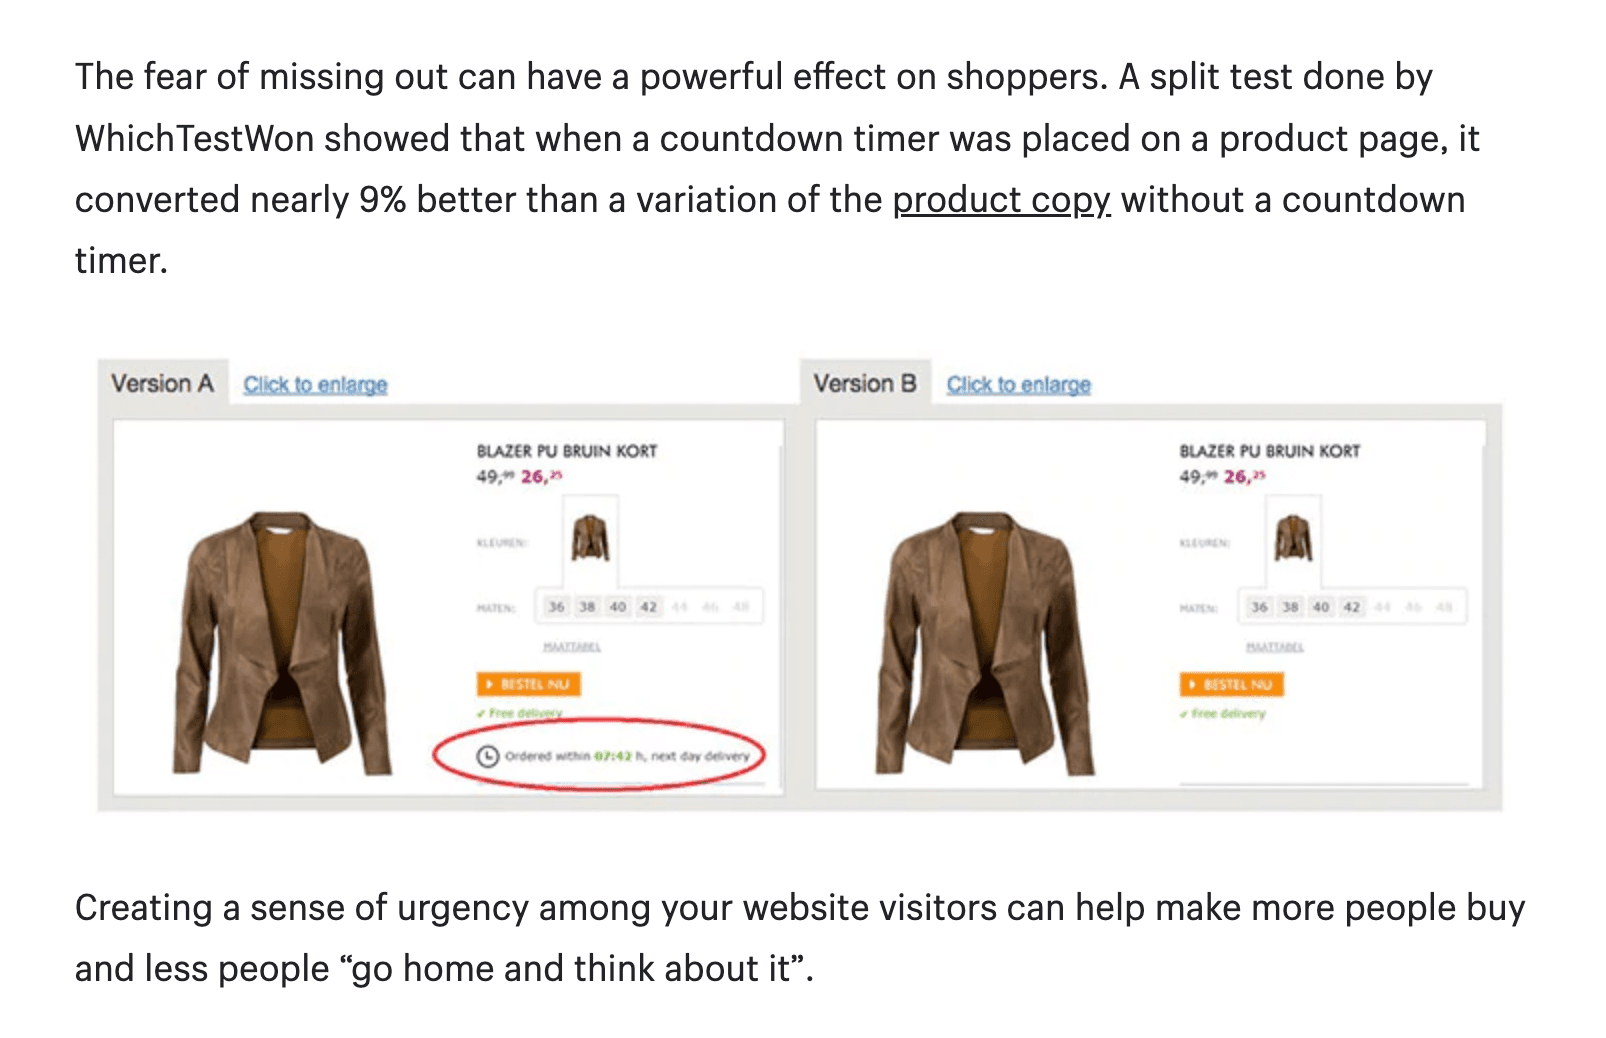 Two screenshots from a shopping website back to back. One has a countdown timer, reading "Order within 07:42, next day delivery", the other does not have this. 